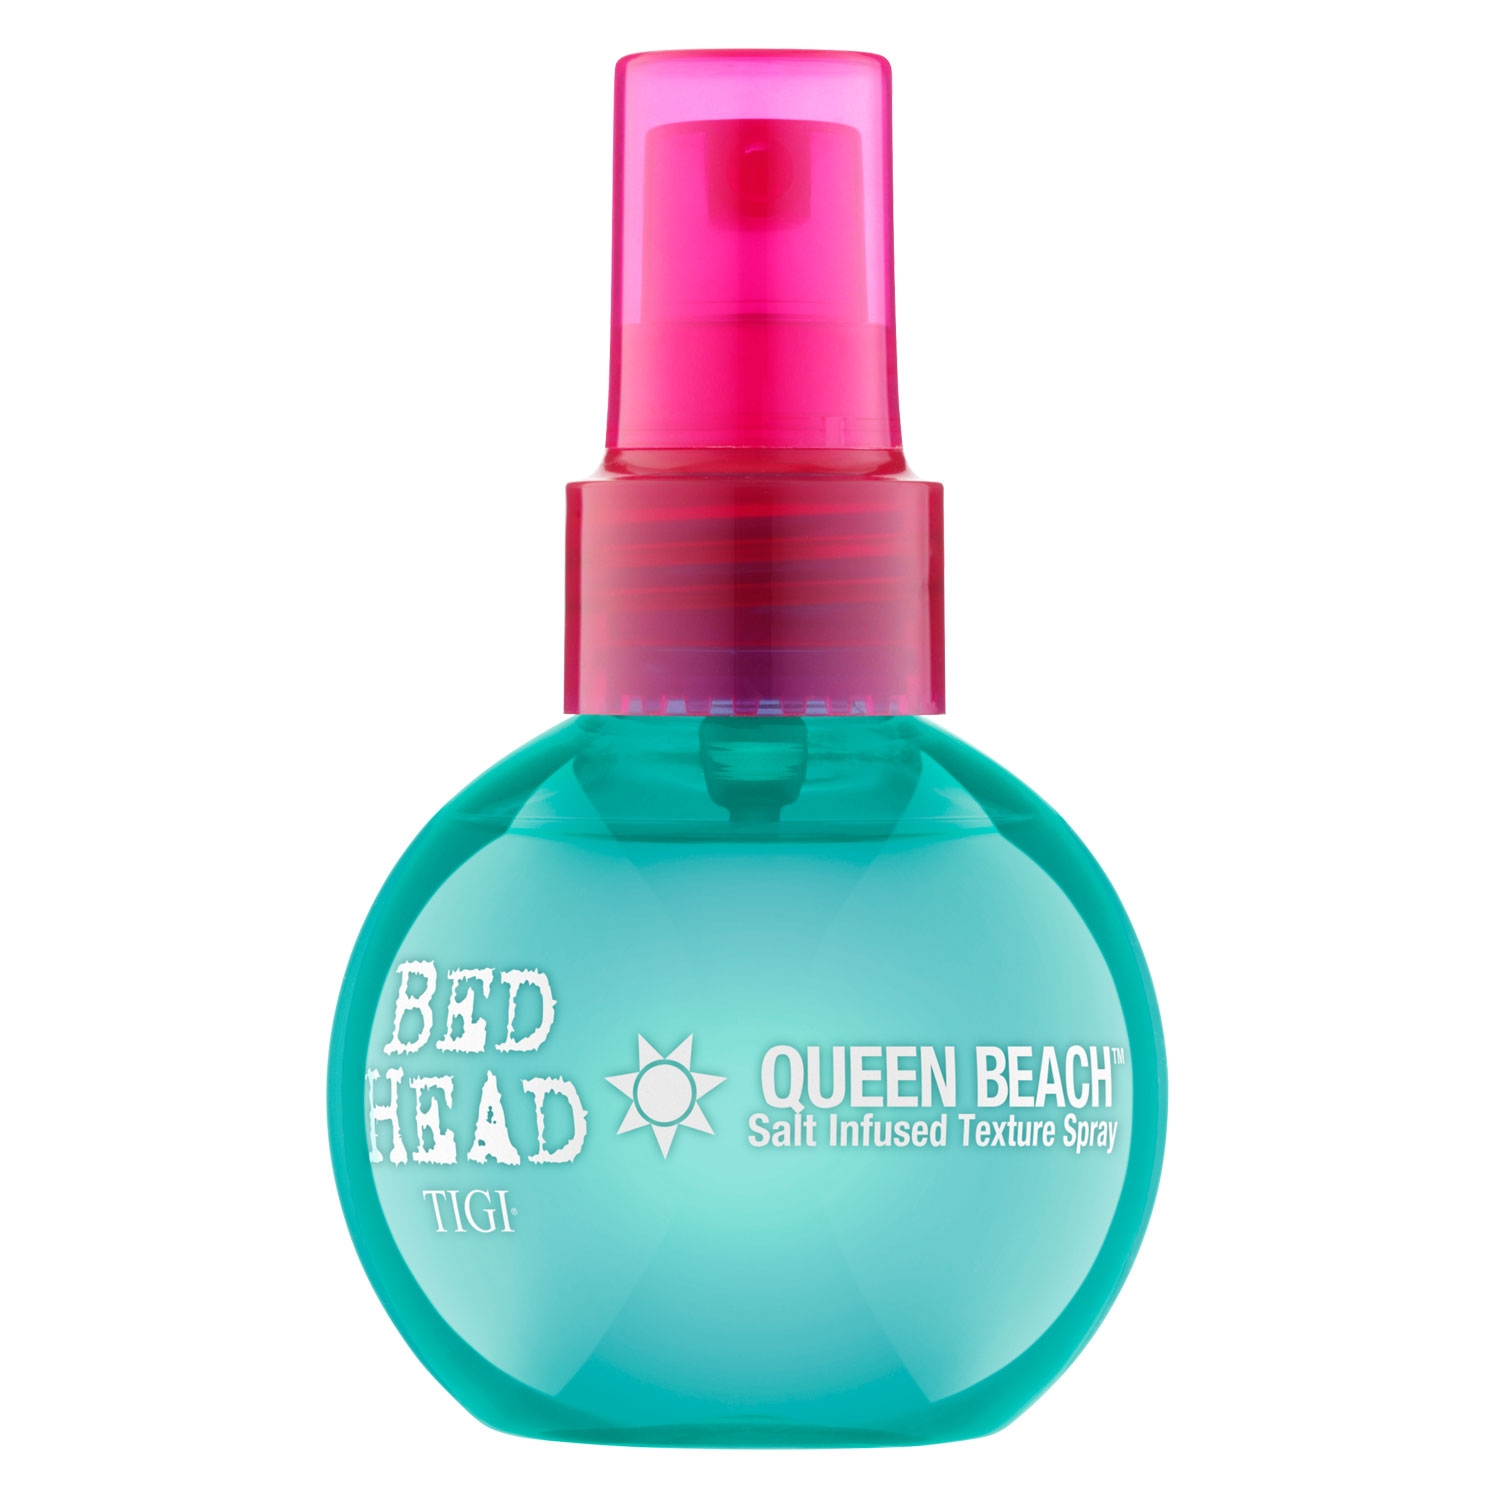 Product image from Bed Head - Queen Beach